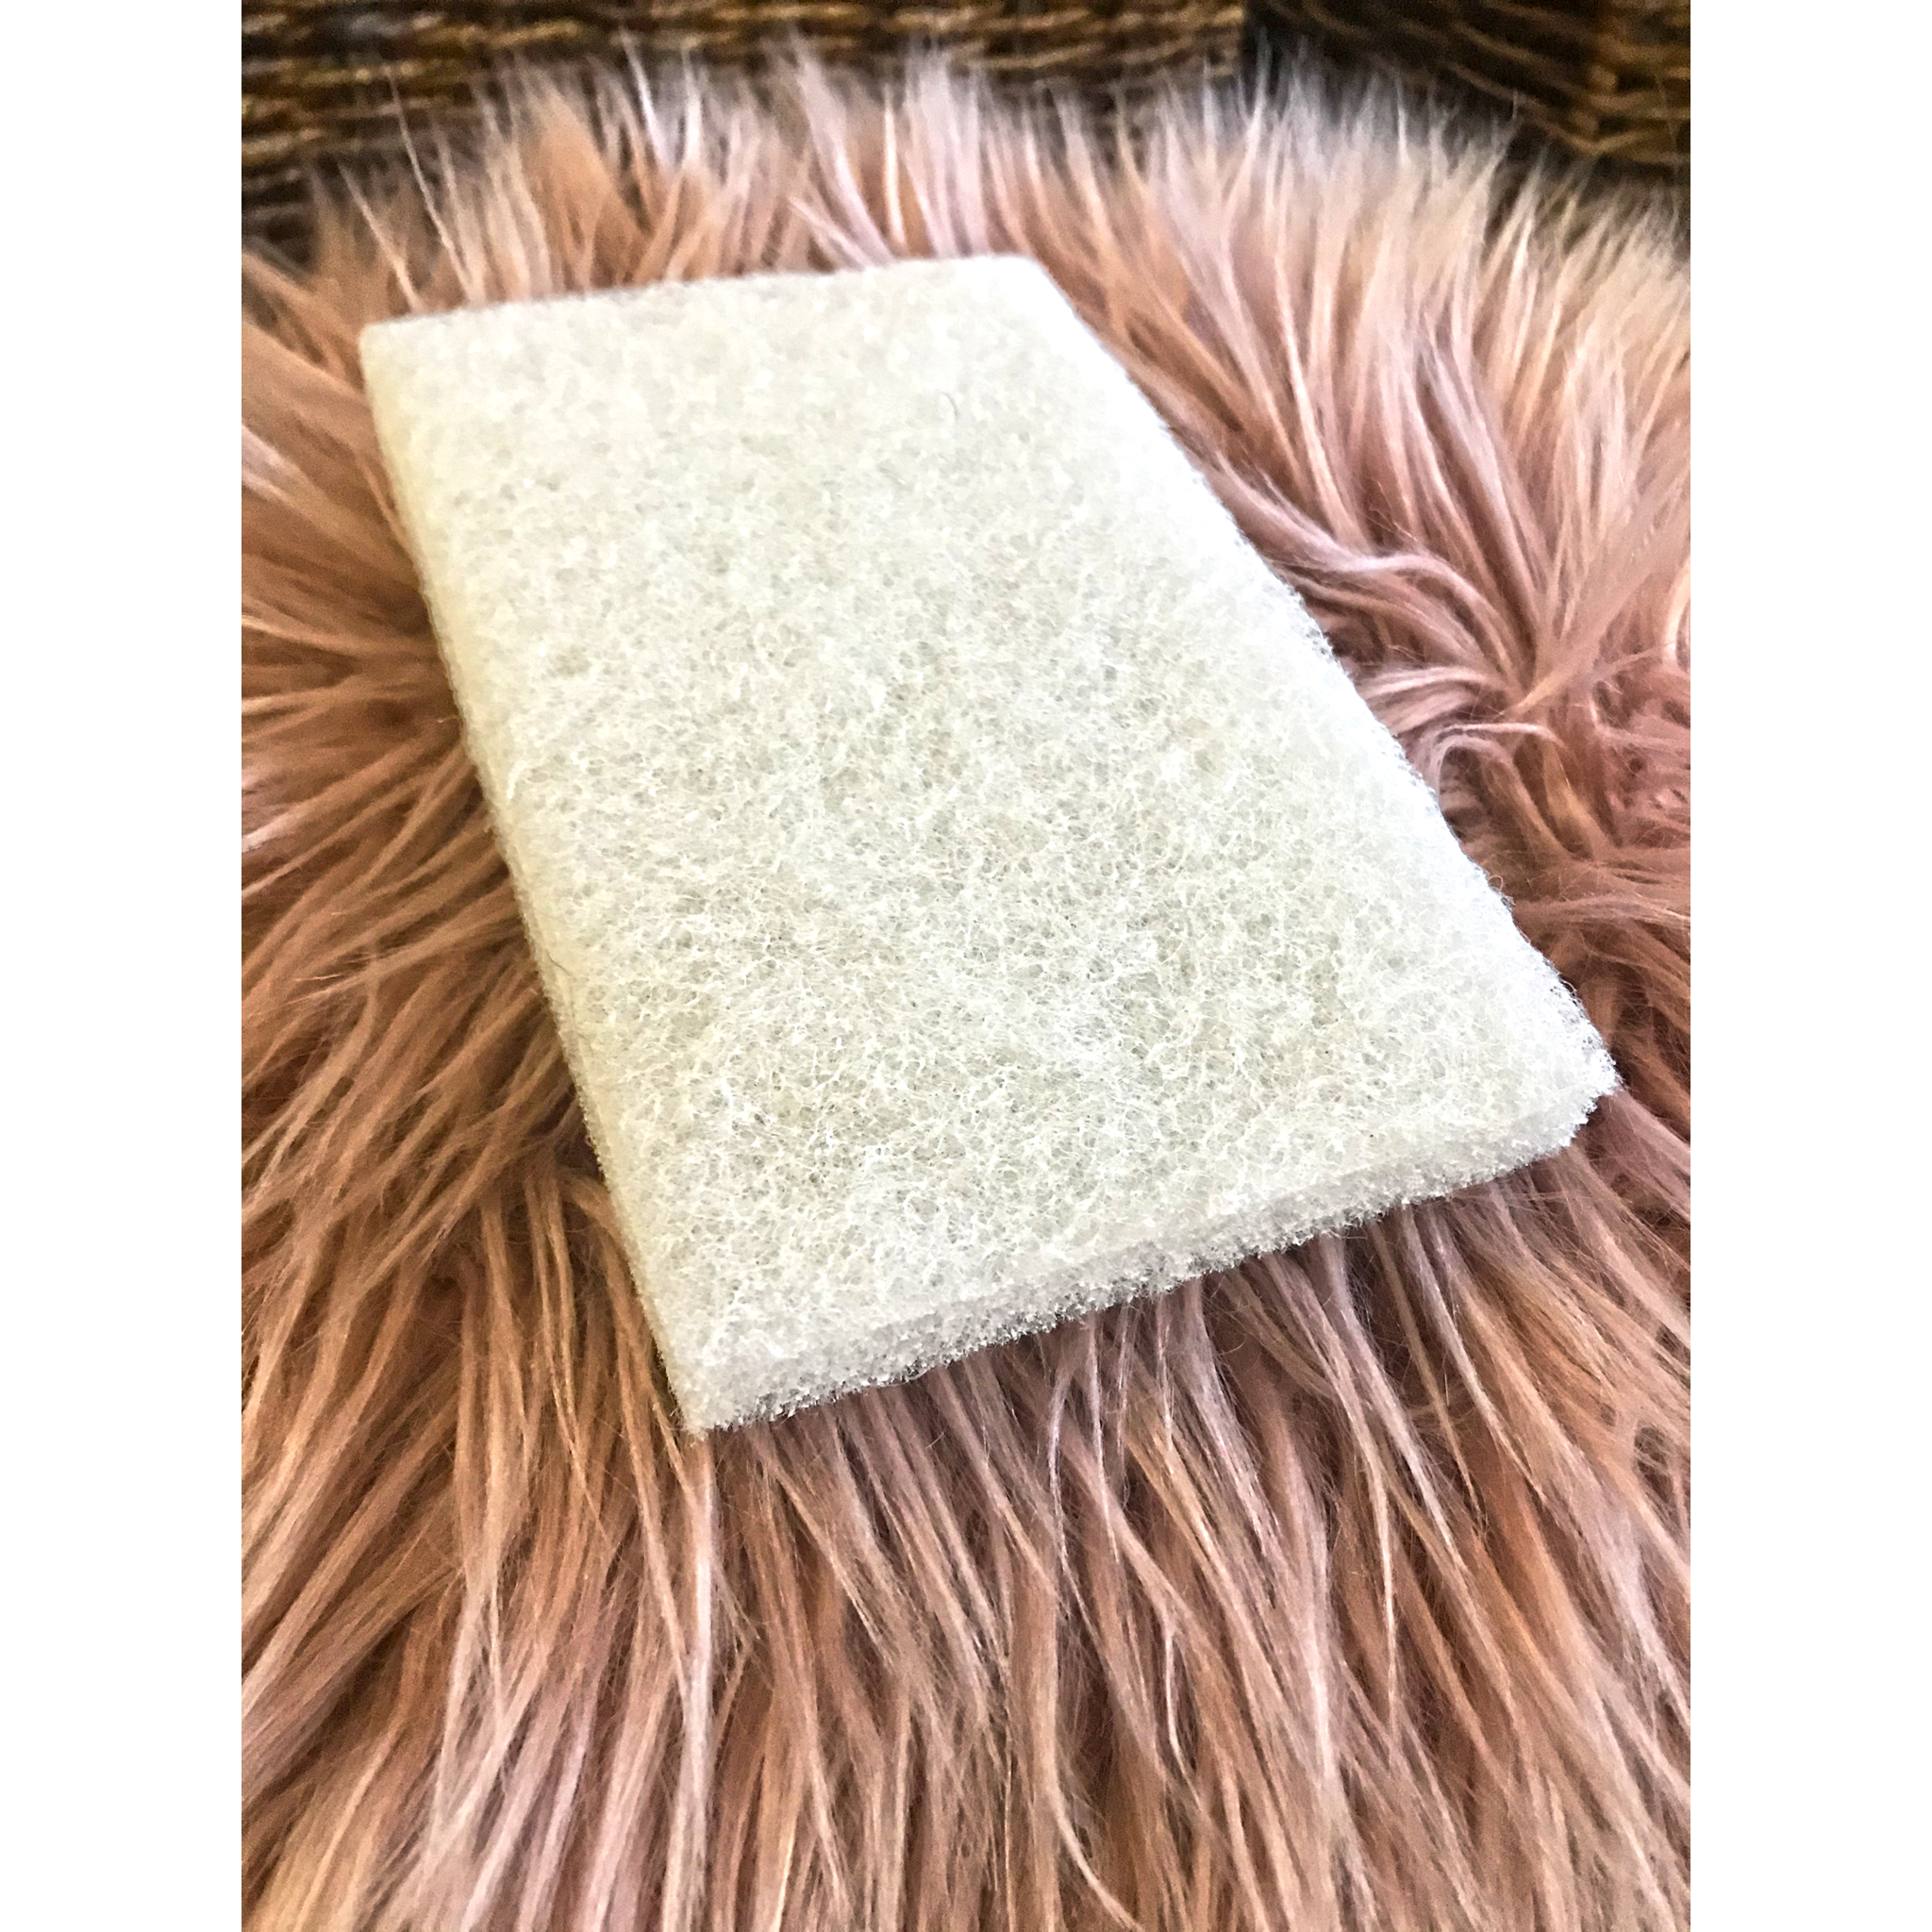 A rectangular white finishing pad is sitting on a mauve colored, long, faux fur piece of carpet.